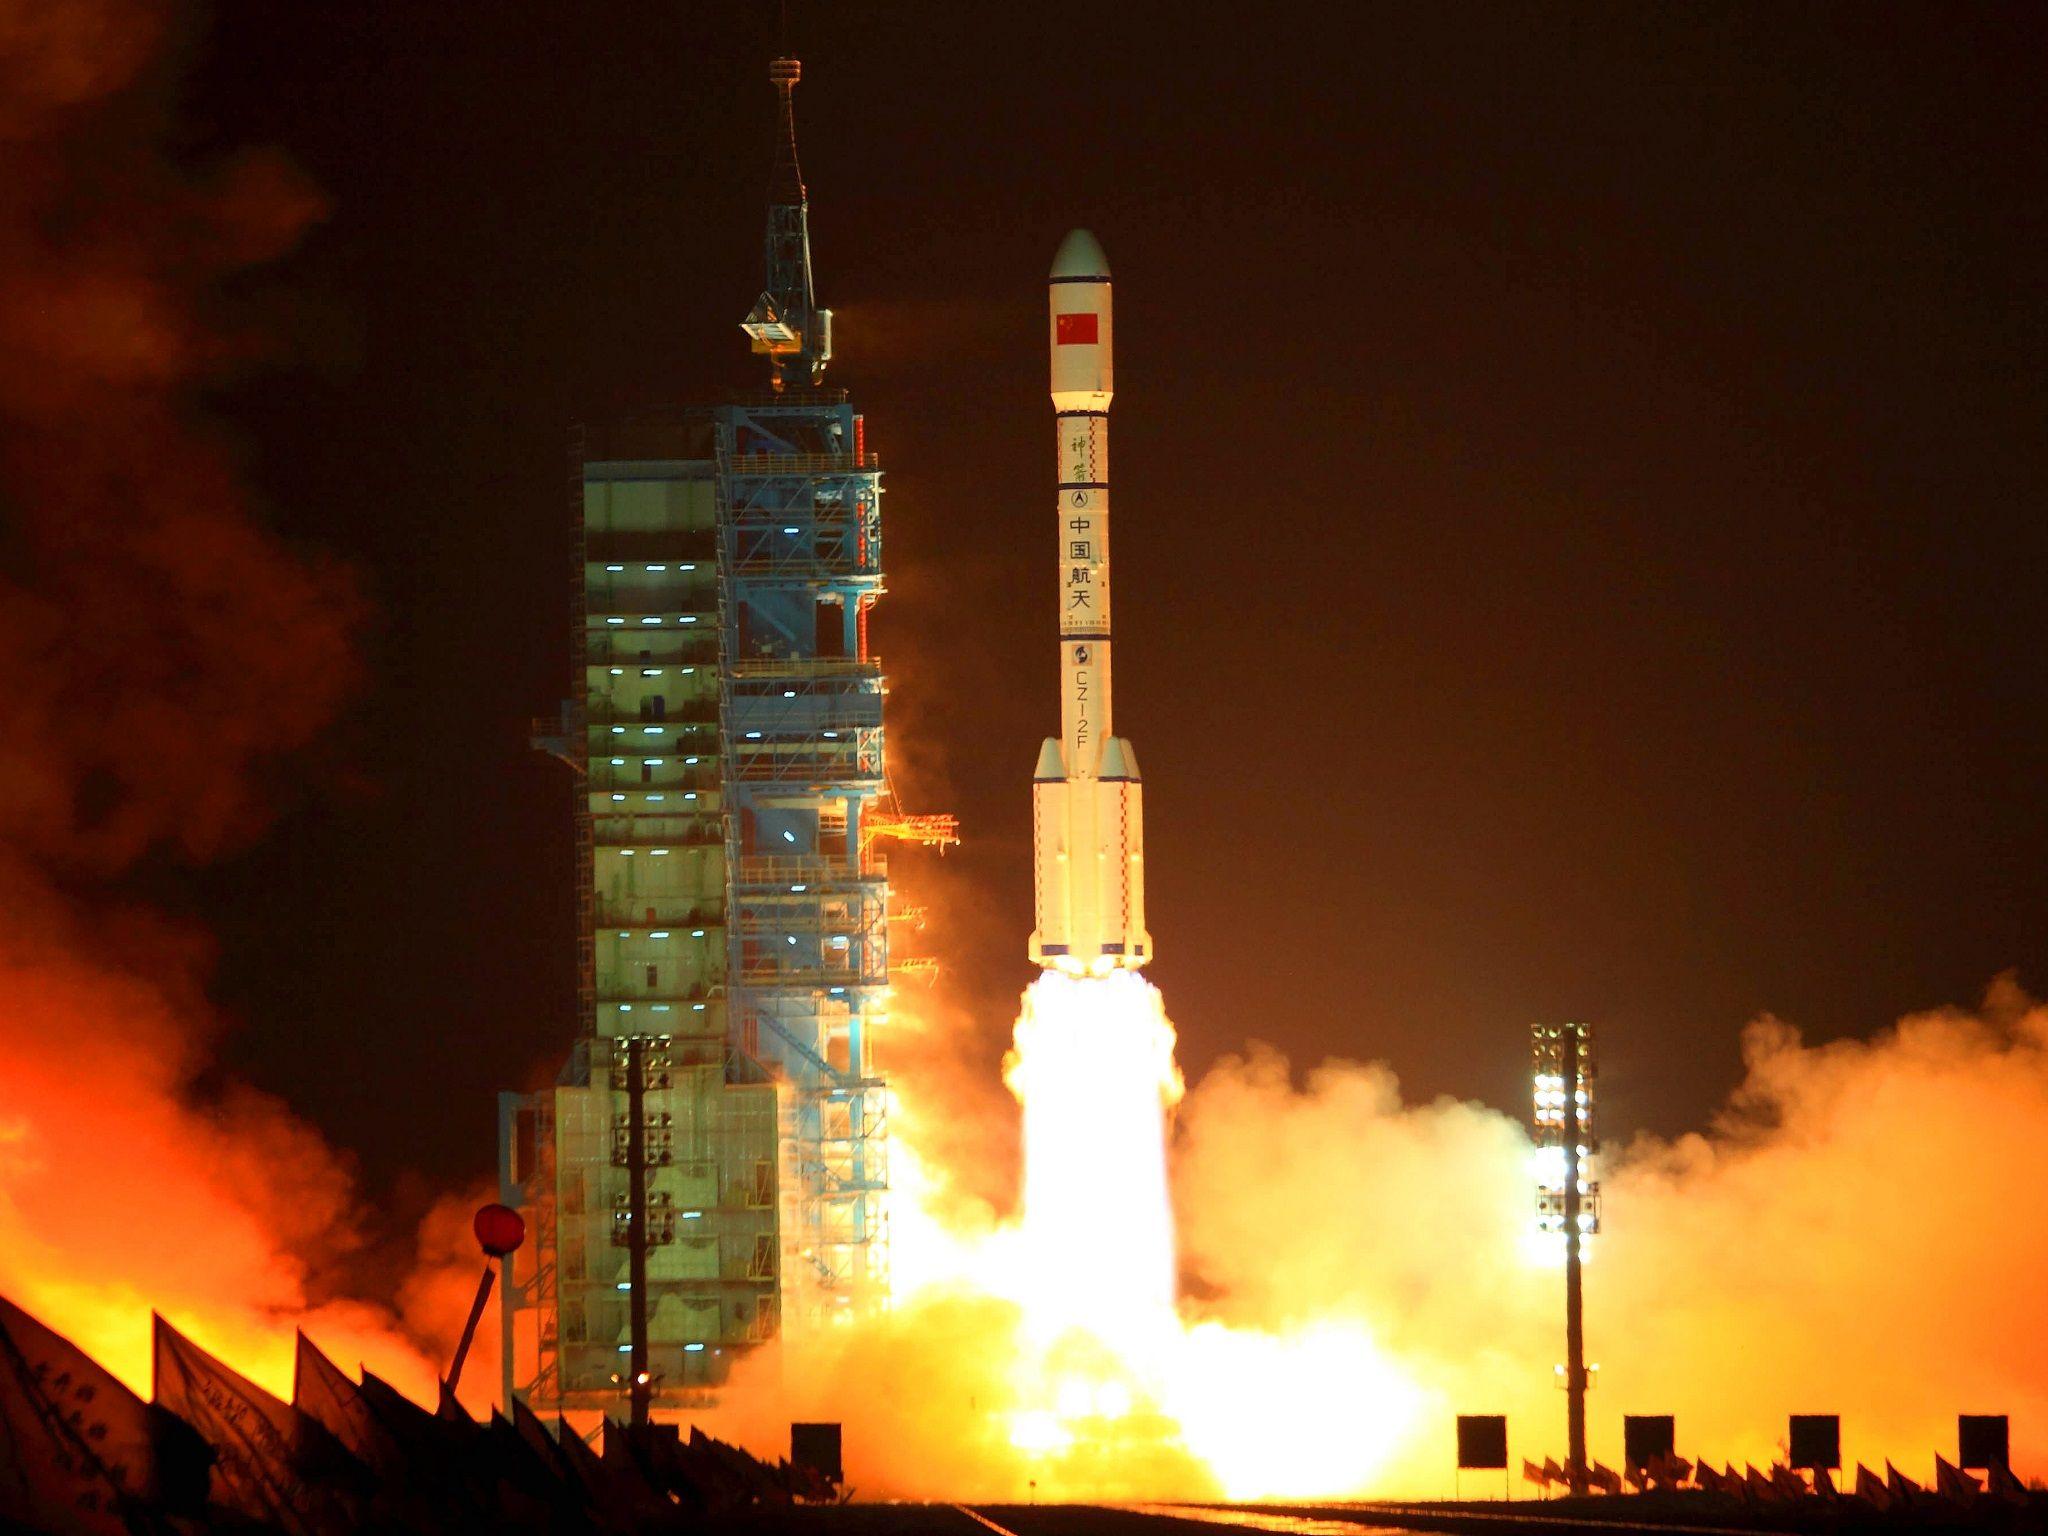 China's space station 'out of control' and on crash course to